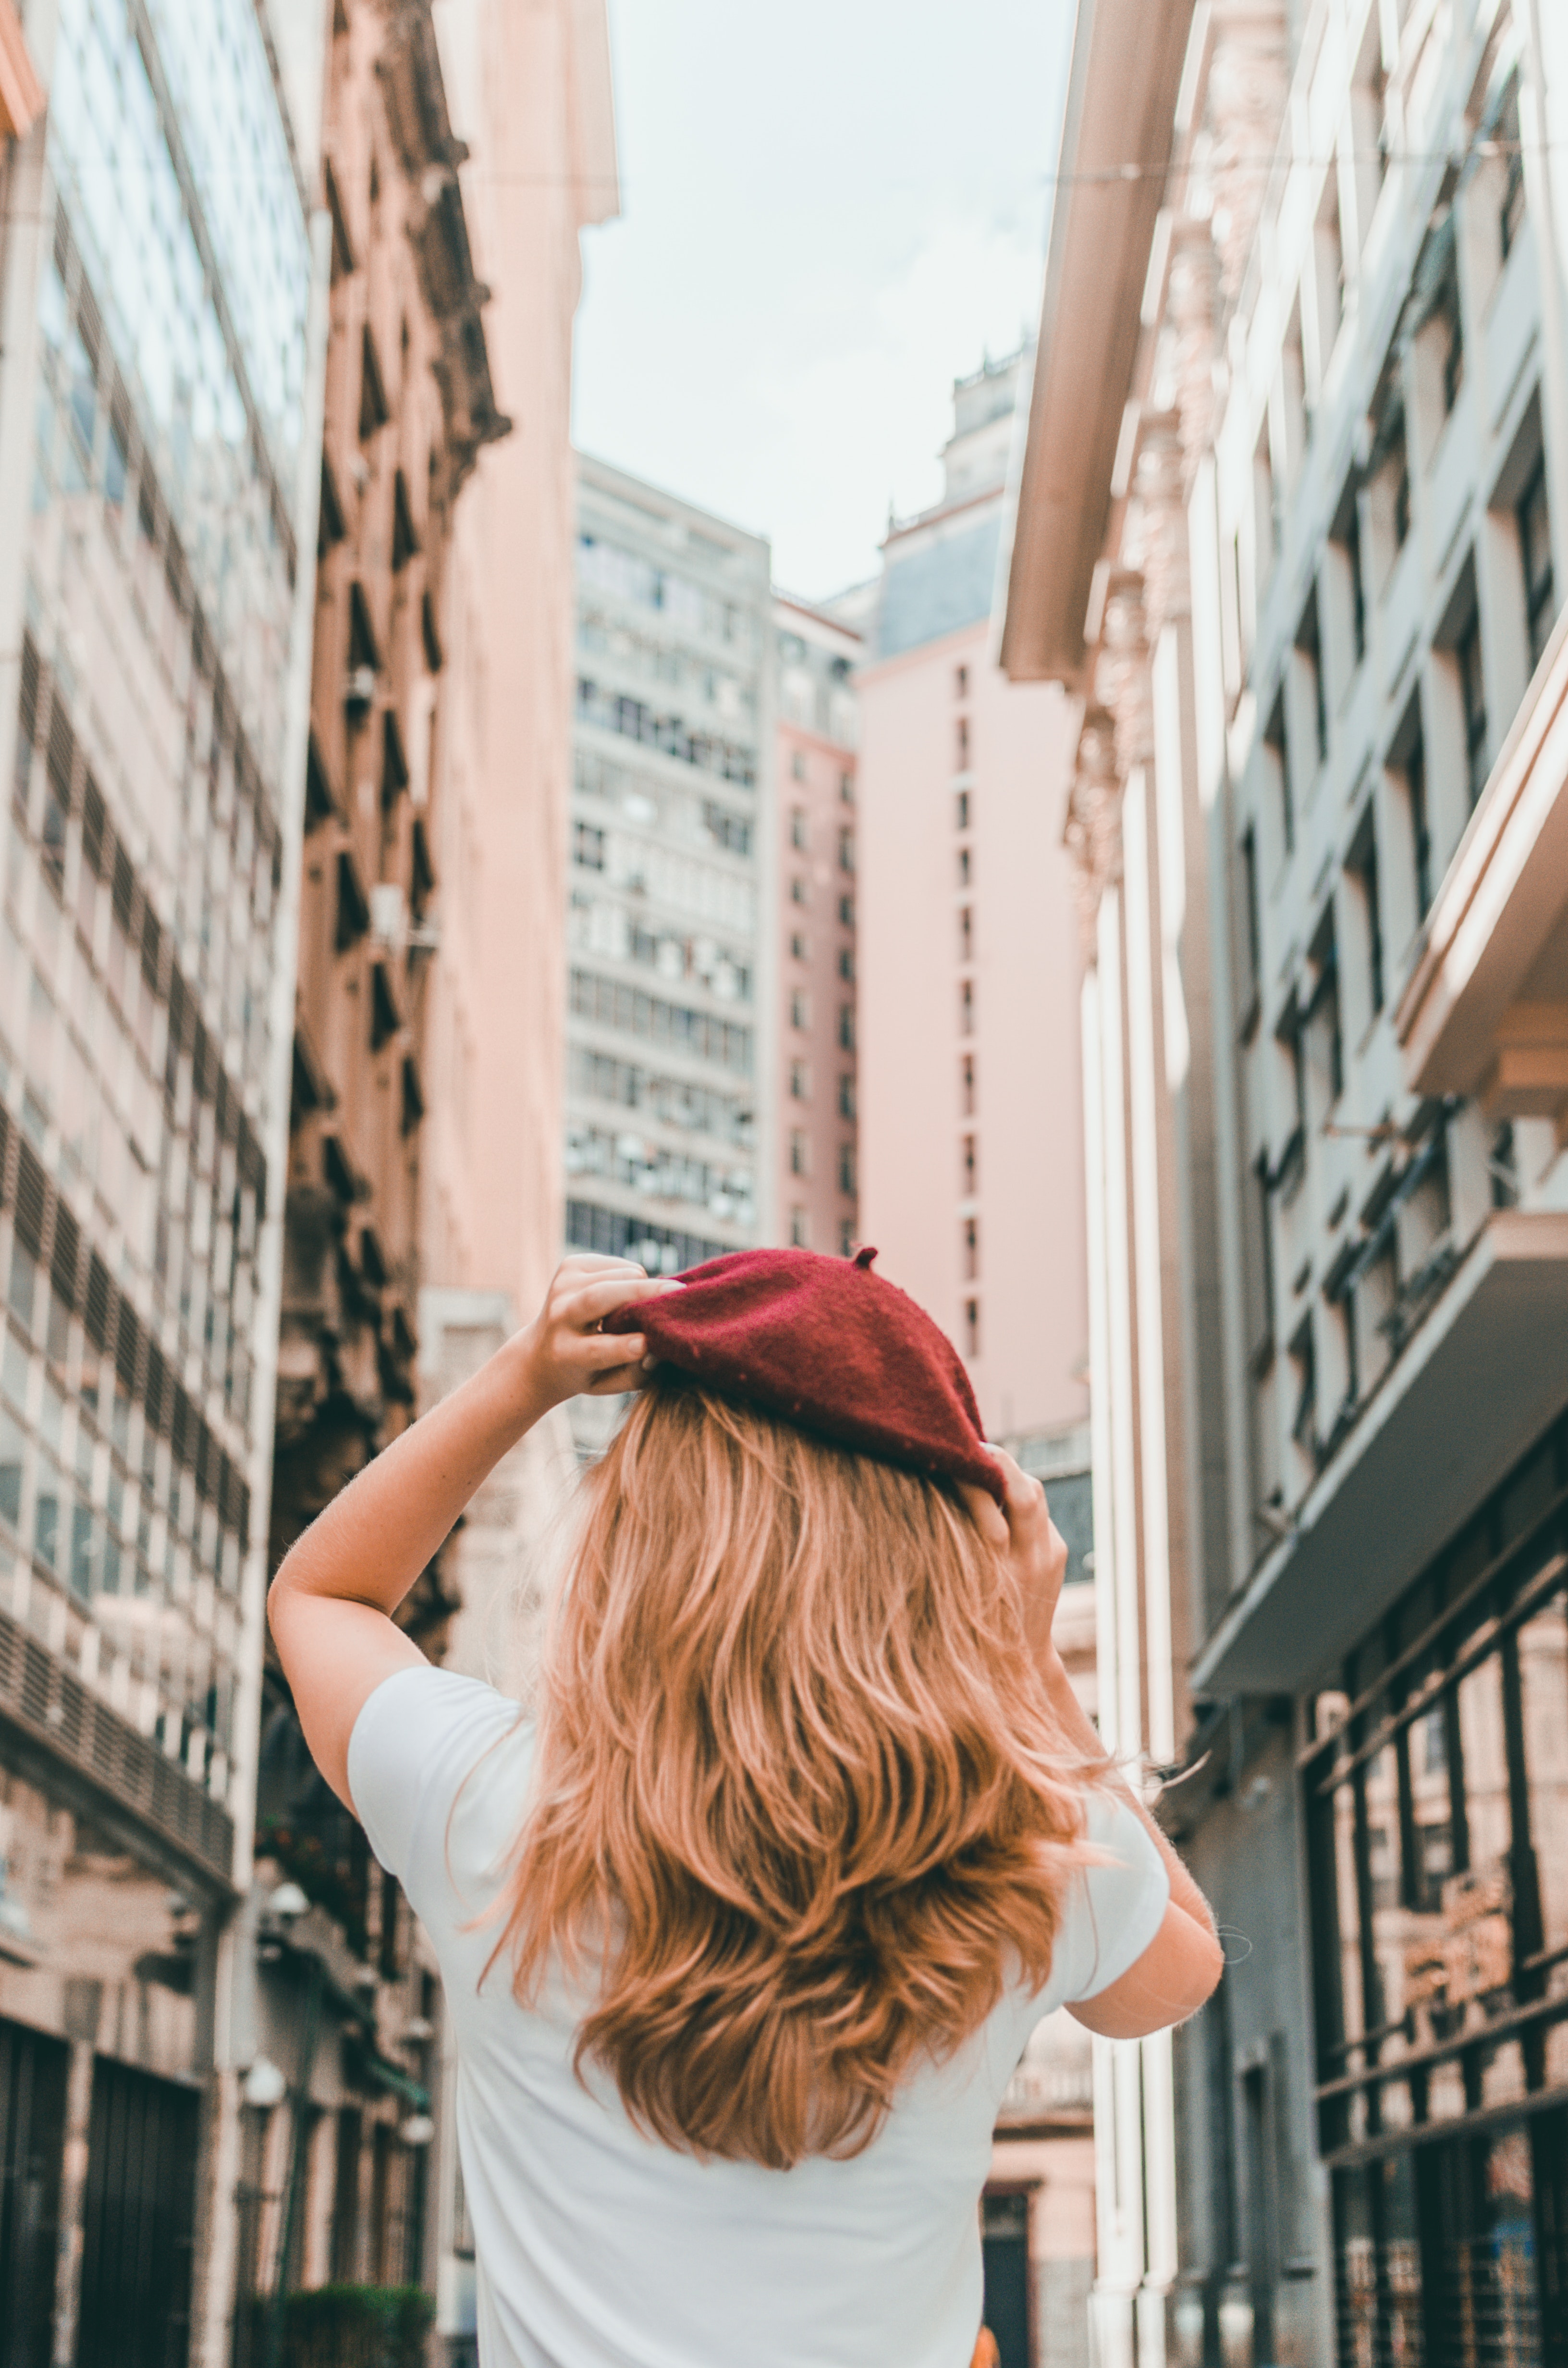 Back view of a girl in a red hat walking among tall buildings